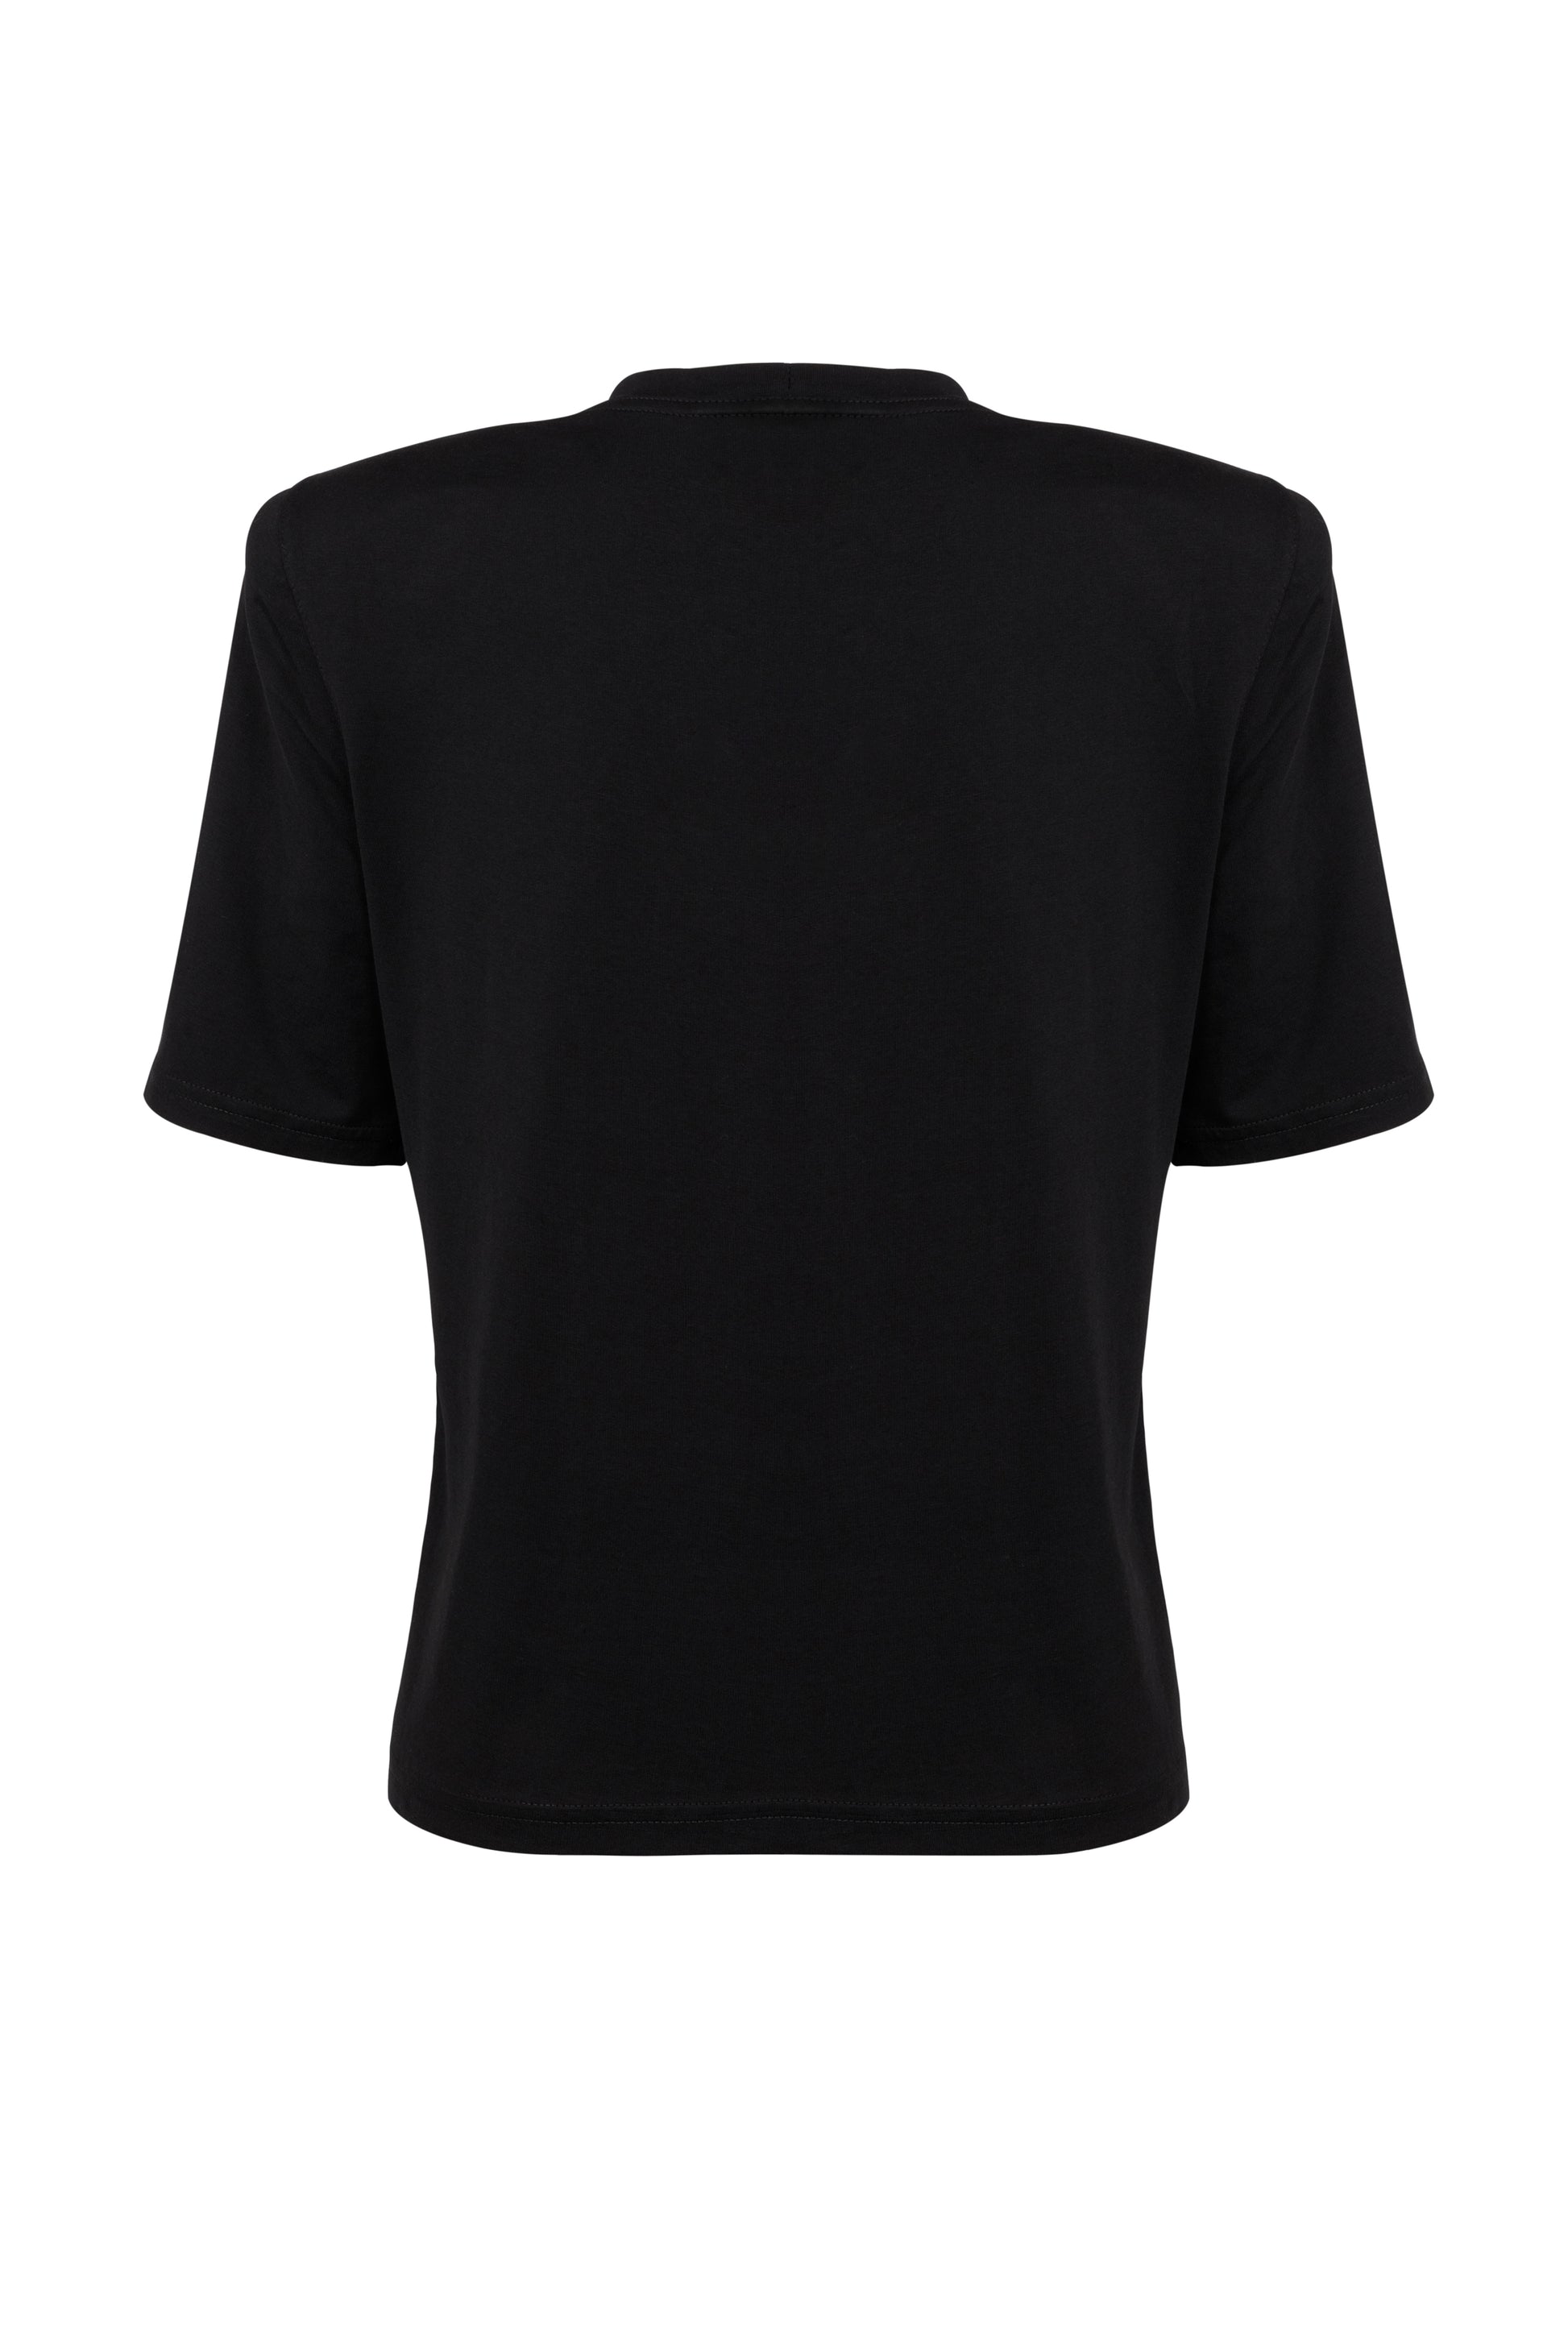 Black, oversized silhouette t-shirt with spiral embroidery in white. The embroidery is in the upper frontal centre of the t-shirt. The fabric is from 100% eco-friendly cotton. It's photographed from the back on white background.